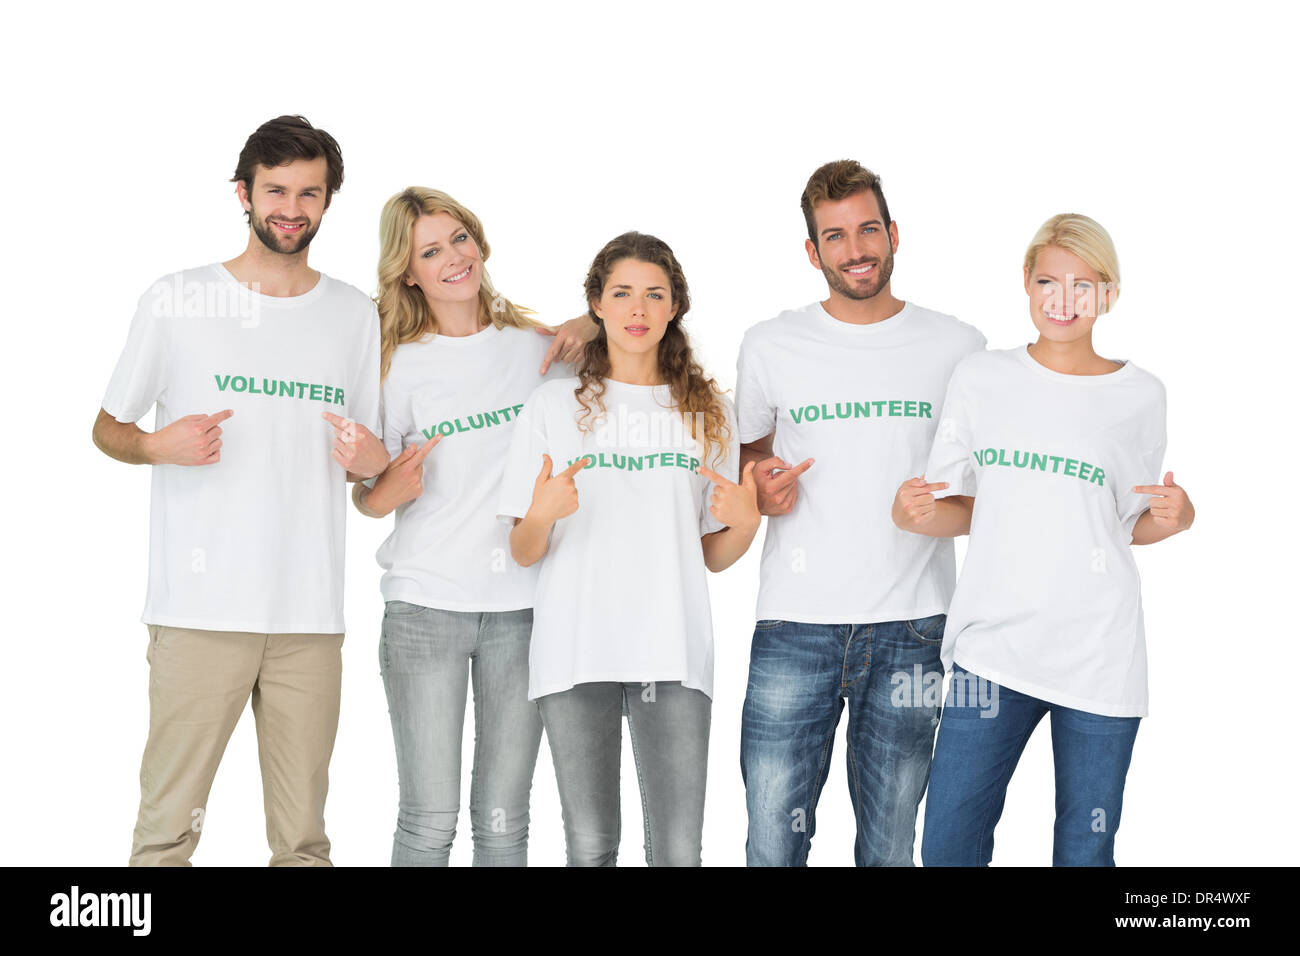 Group portrait of happy volunteers pointing to themselves Stock Photo